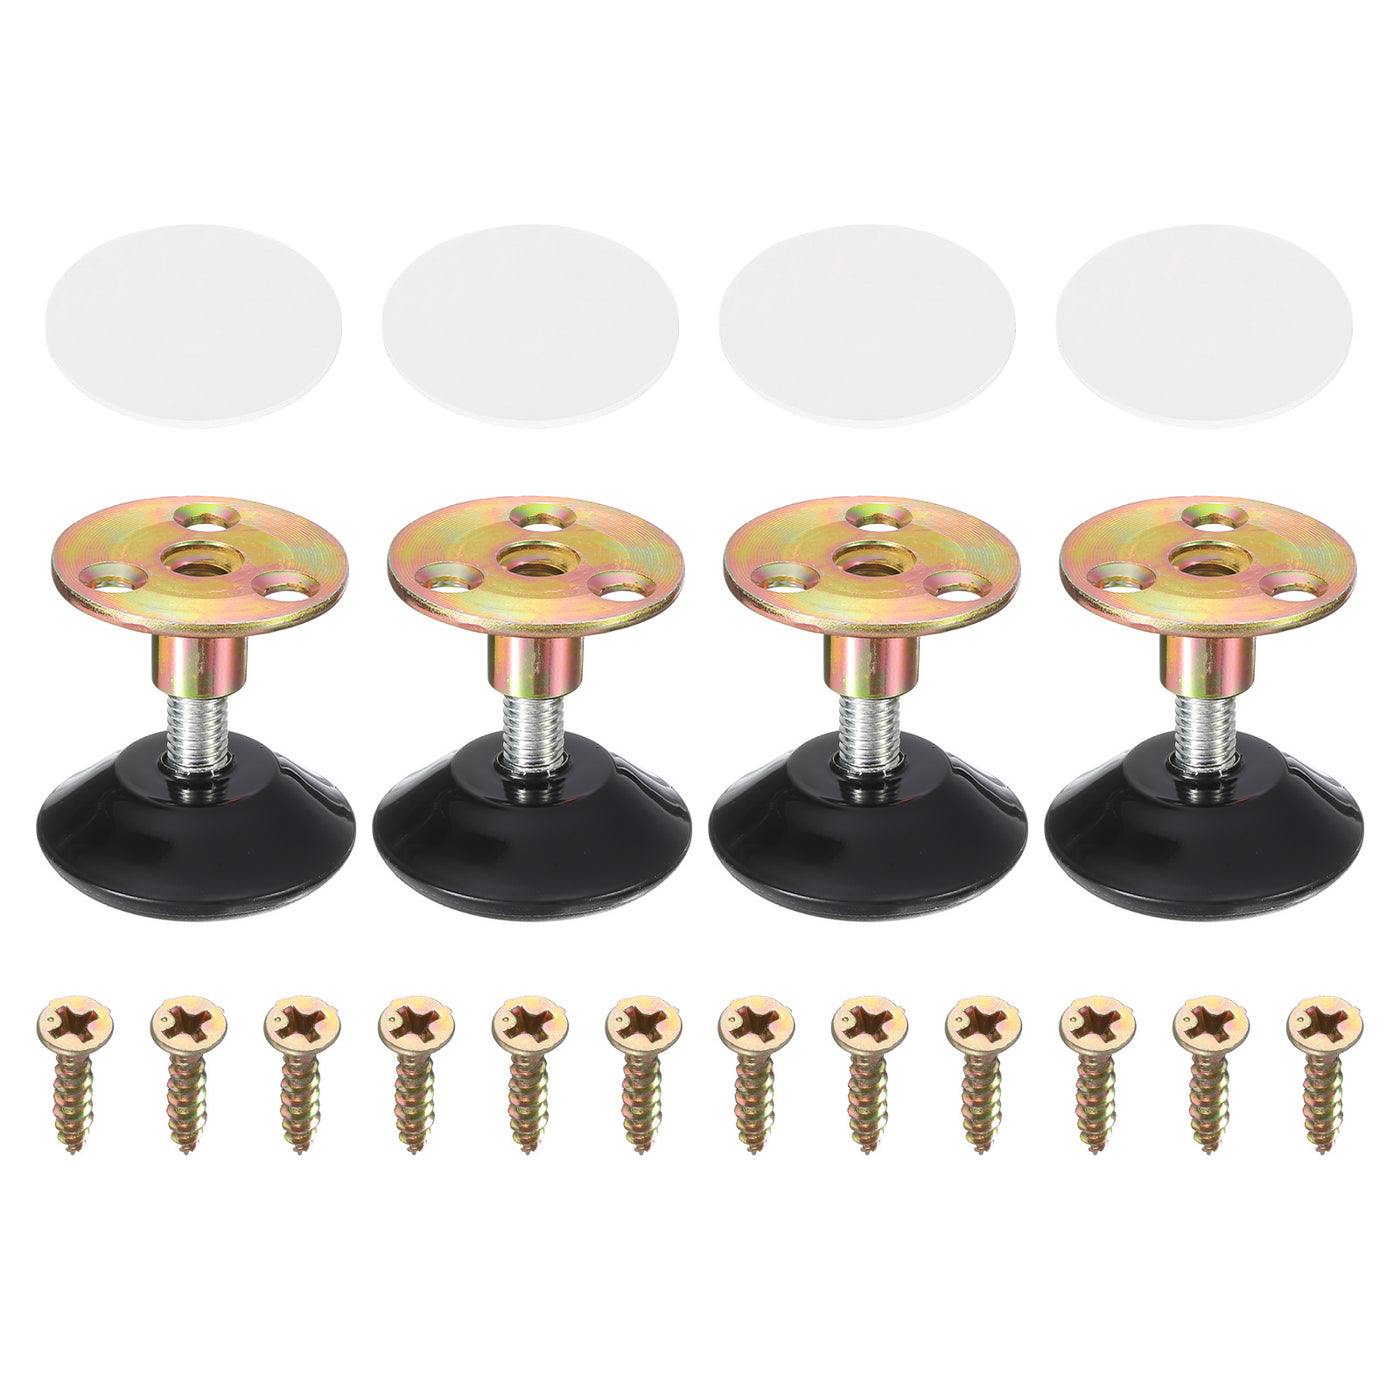 uxcell Uxcell Thread Furniture Leveling Feet, 4Pcs - Adjustable Furniture Feet Levelers, Self-adhesive Threaded Screw-in Raised Base for Tables Sofas (40 x 15 MM)